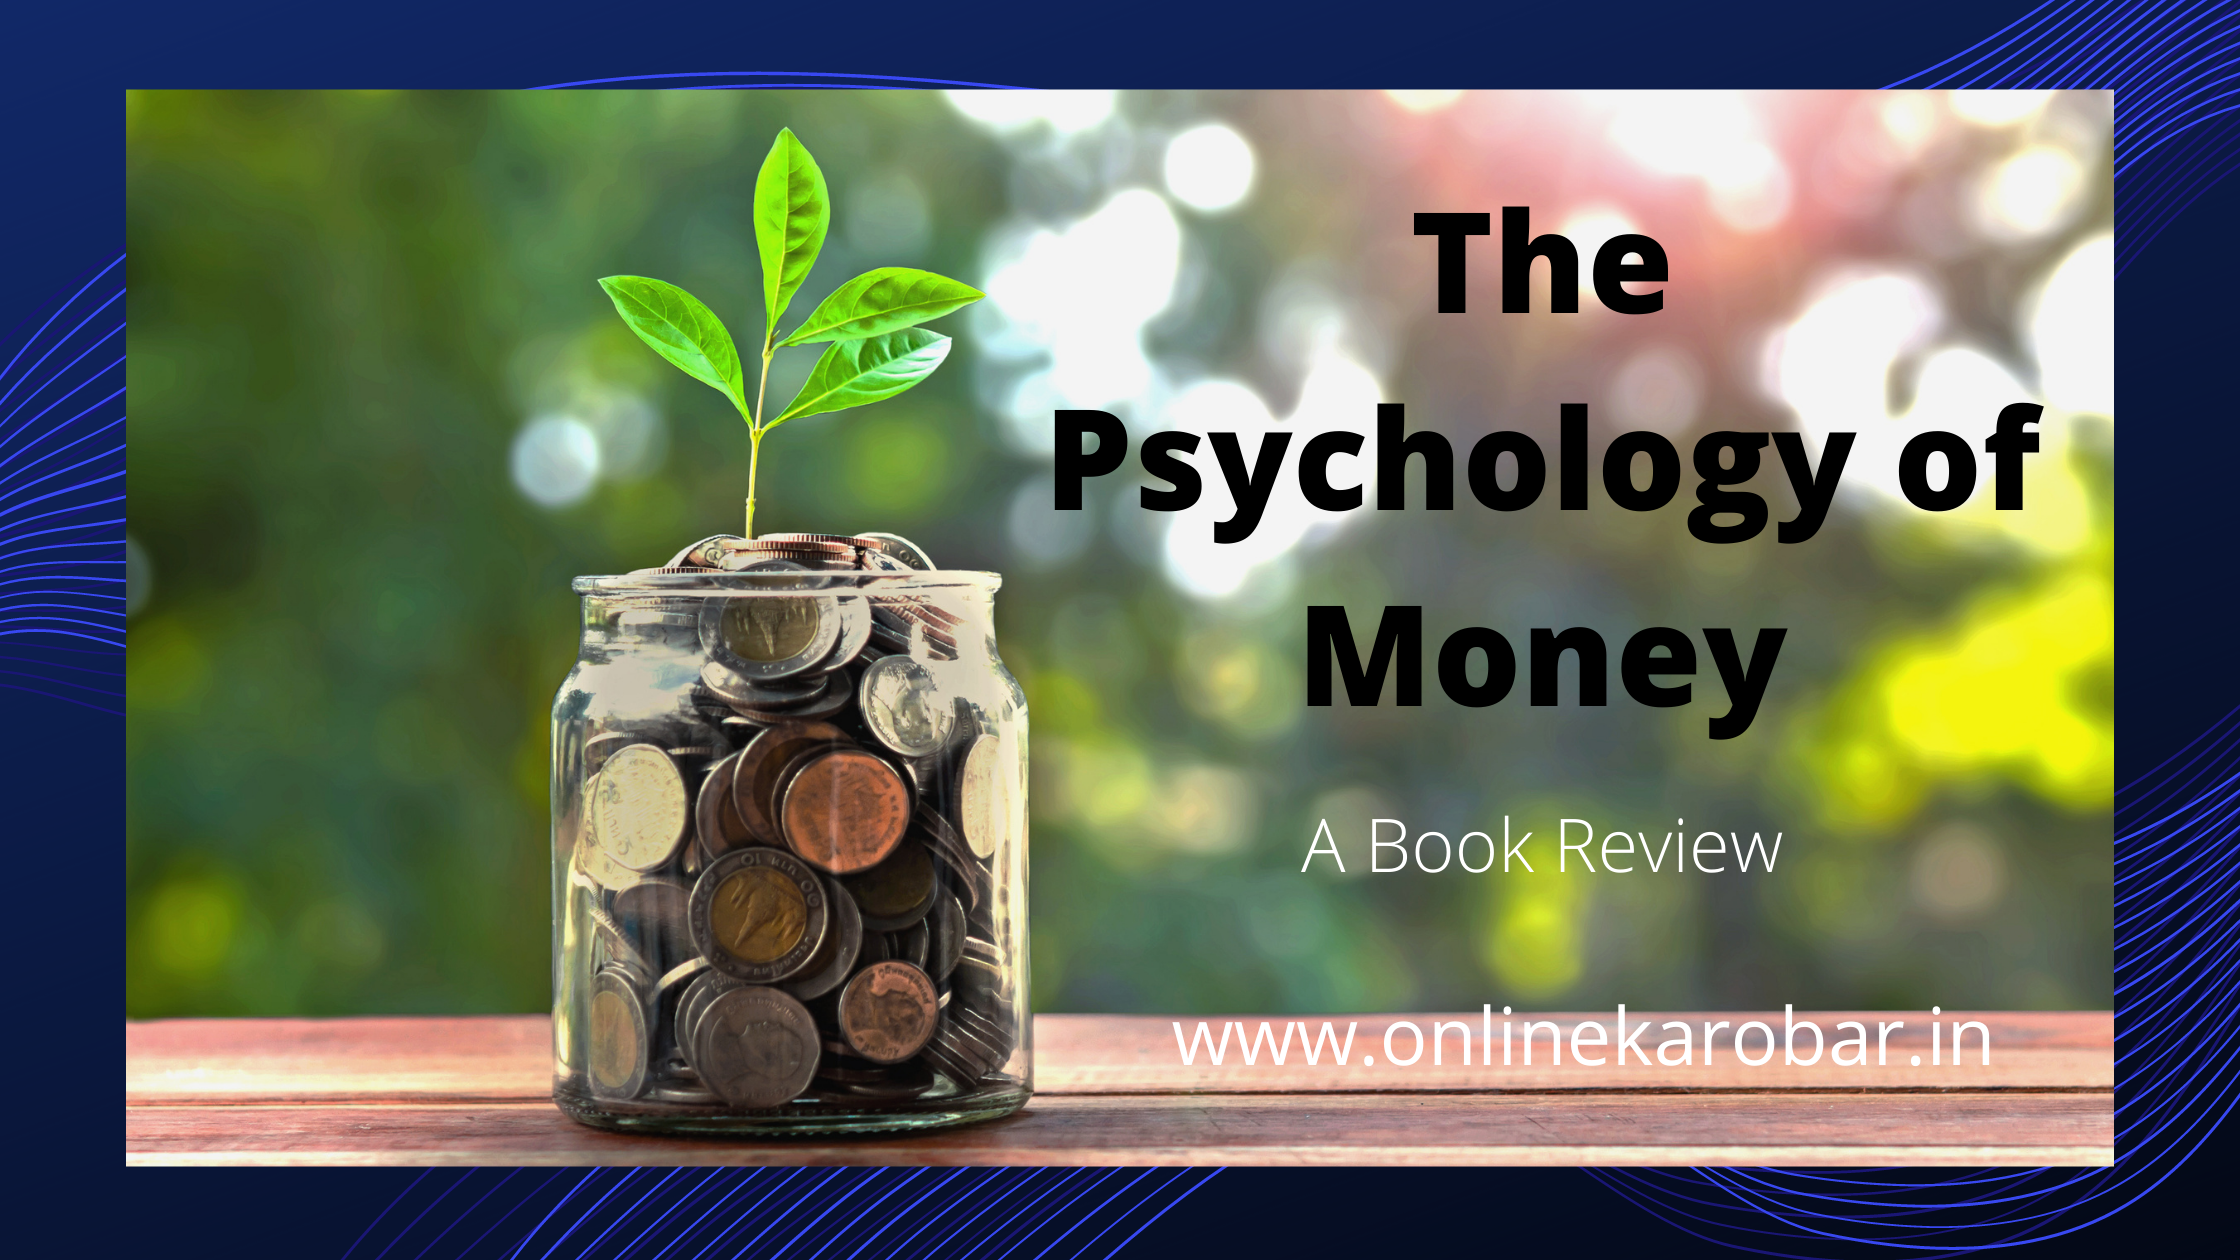 The Psychology of Money by morgan housel